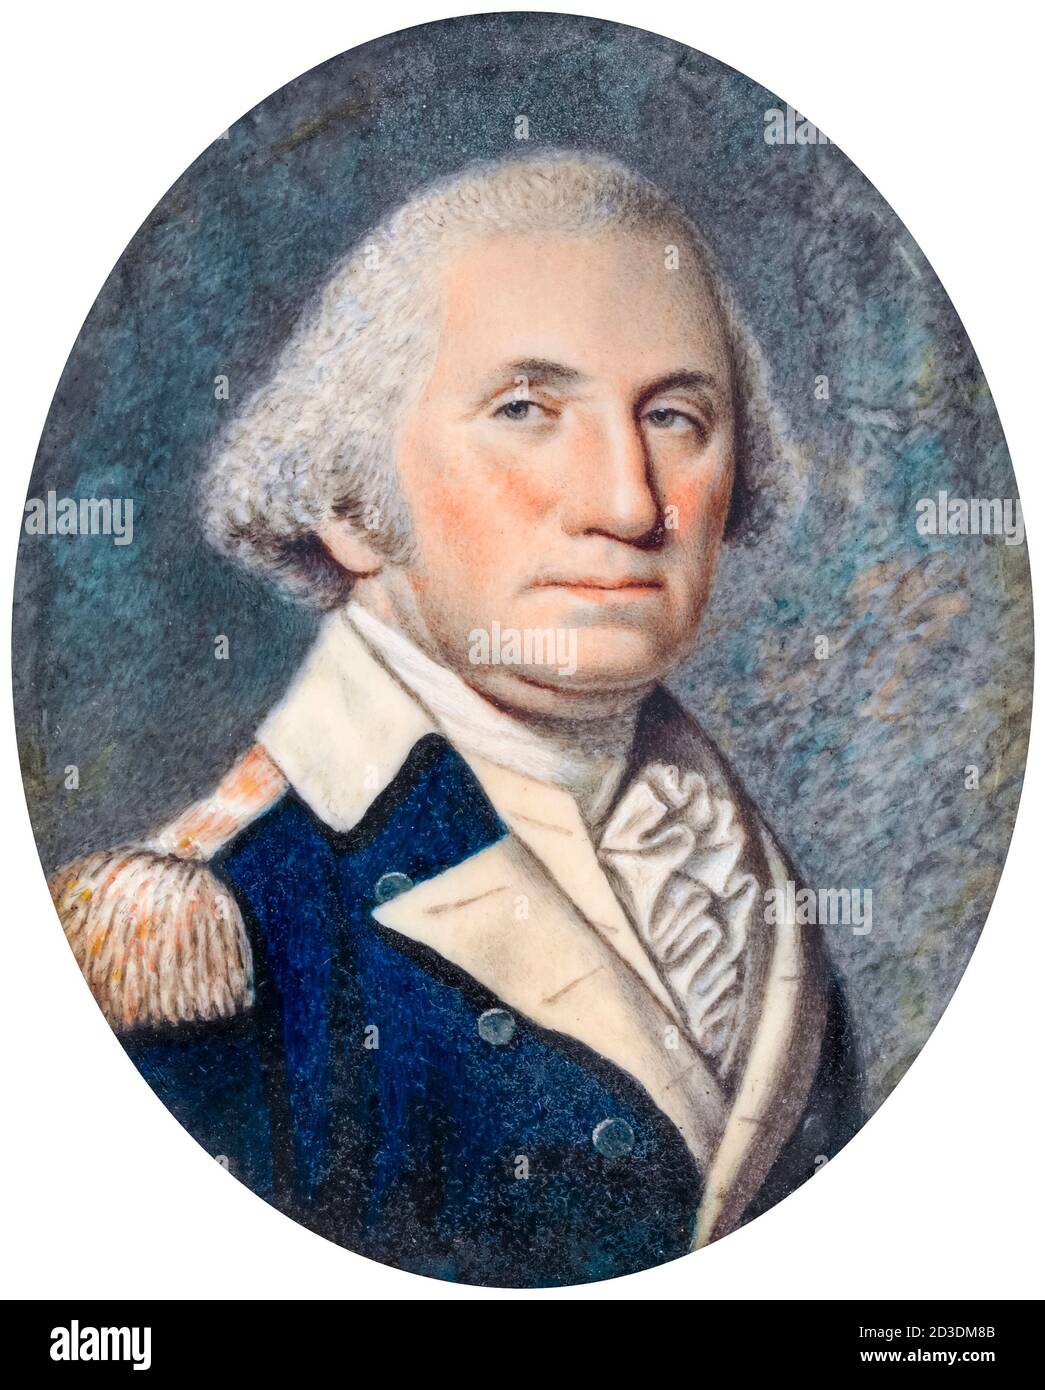 George Washington (1732-1799), 1st President of the United States, portrait miniature by Ellen Wallace Sharples after James Sharples, circa 1803 Stock Photo